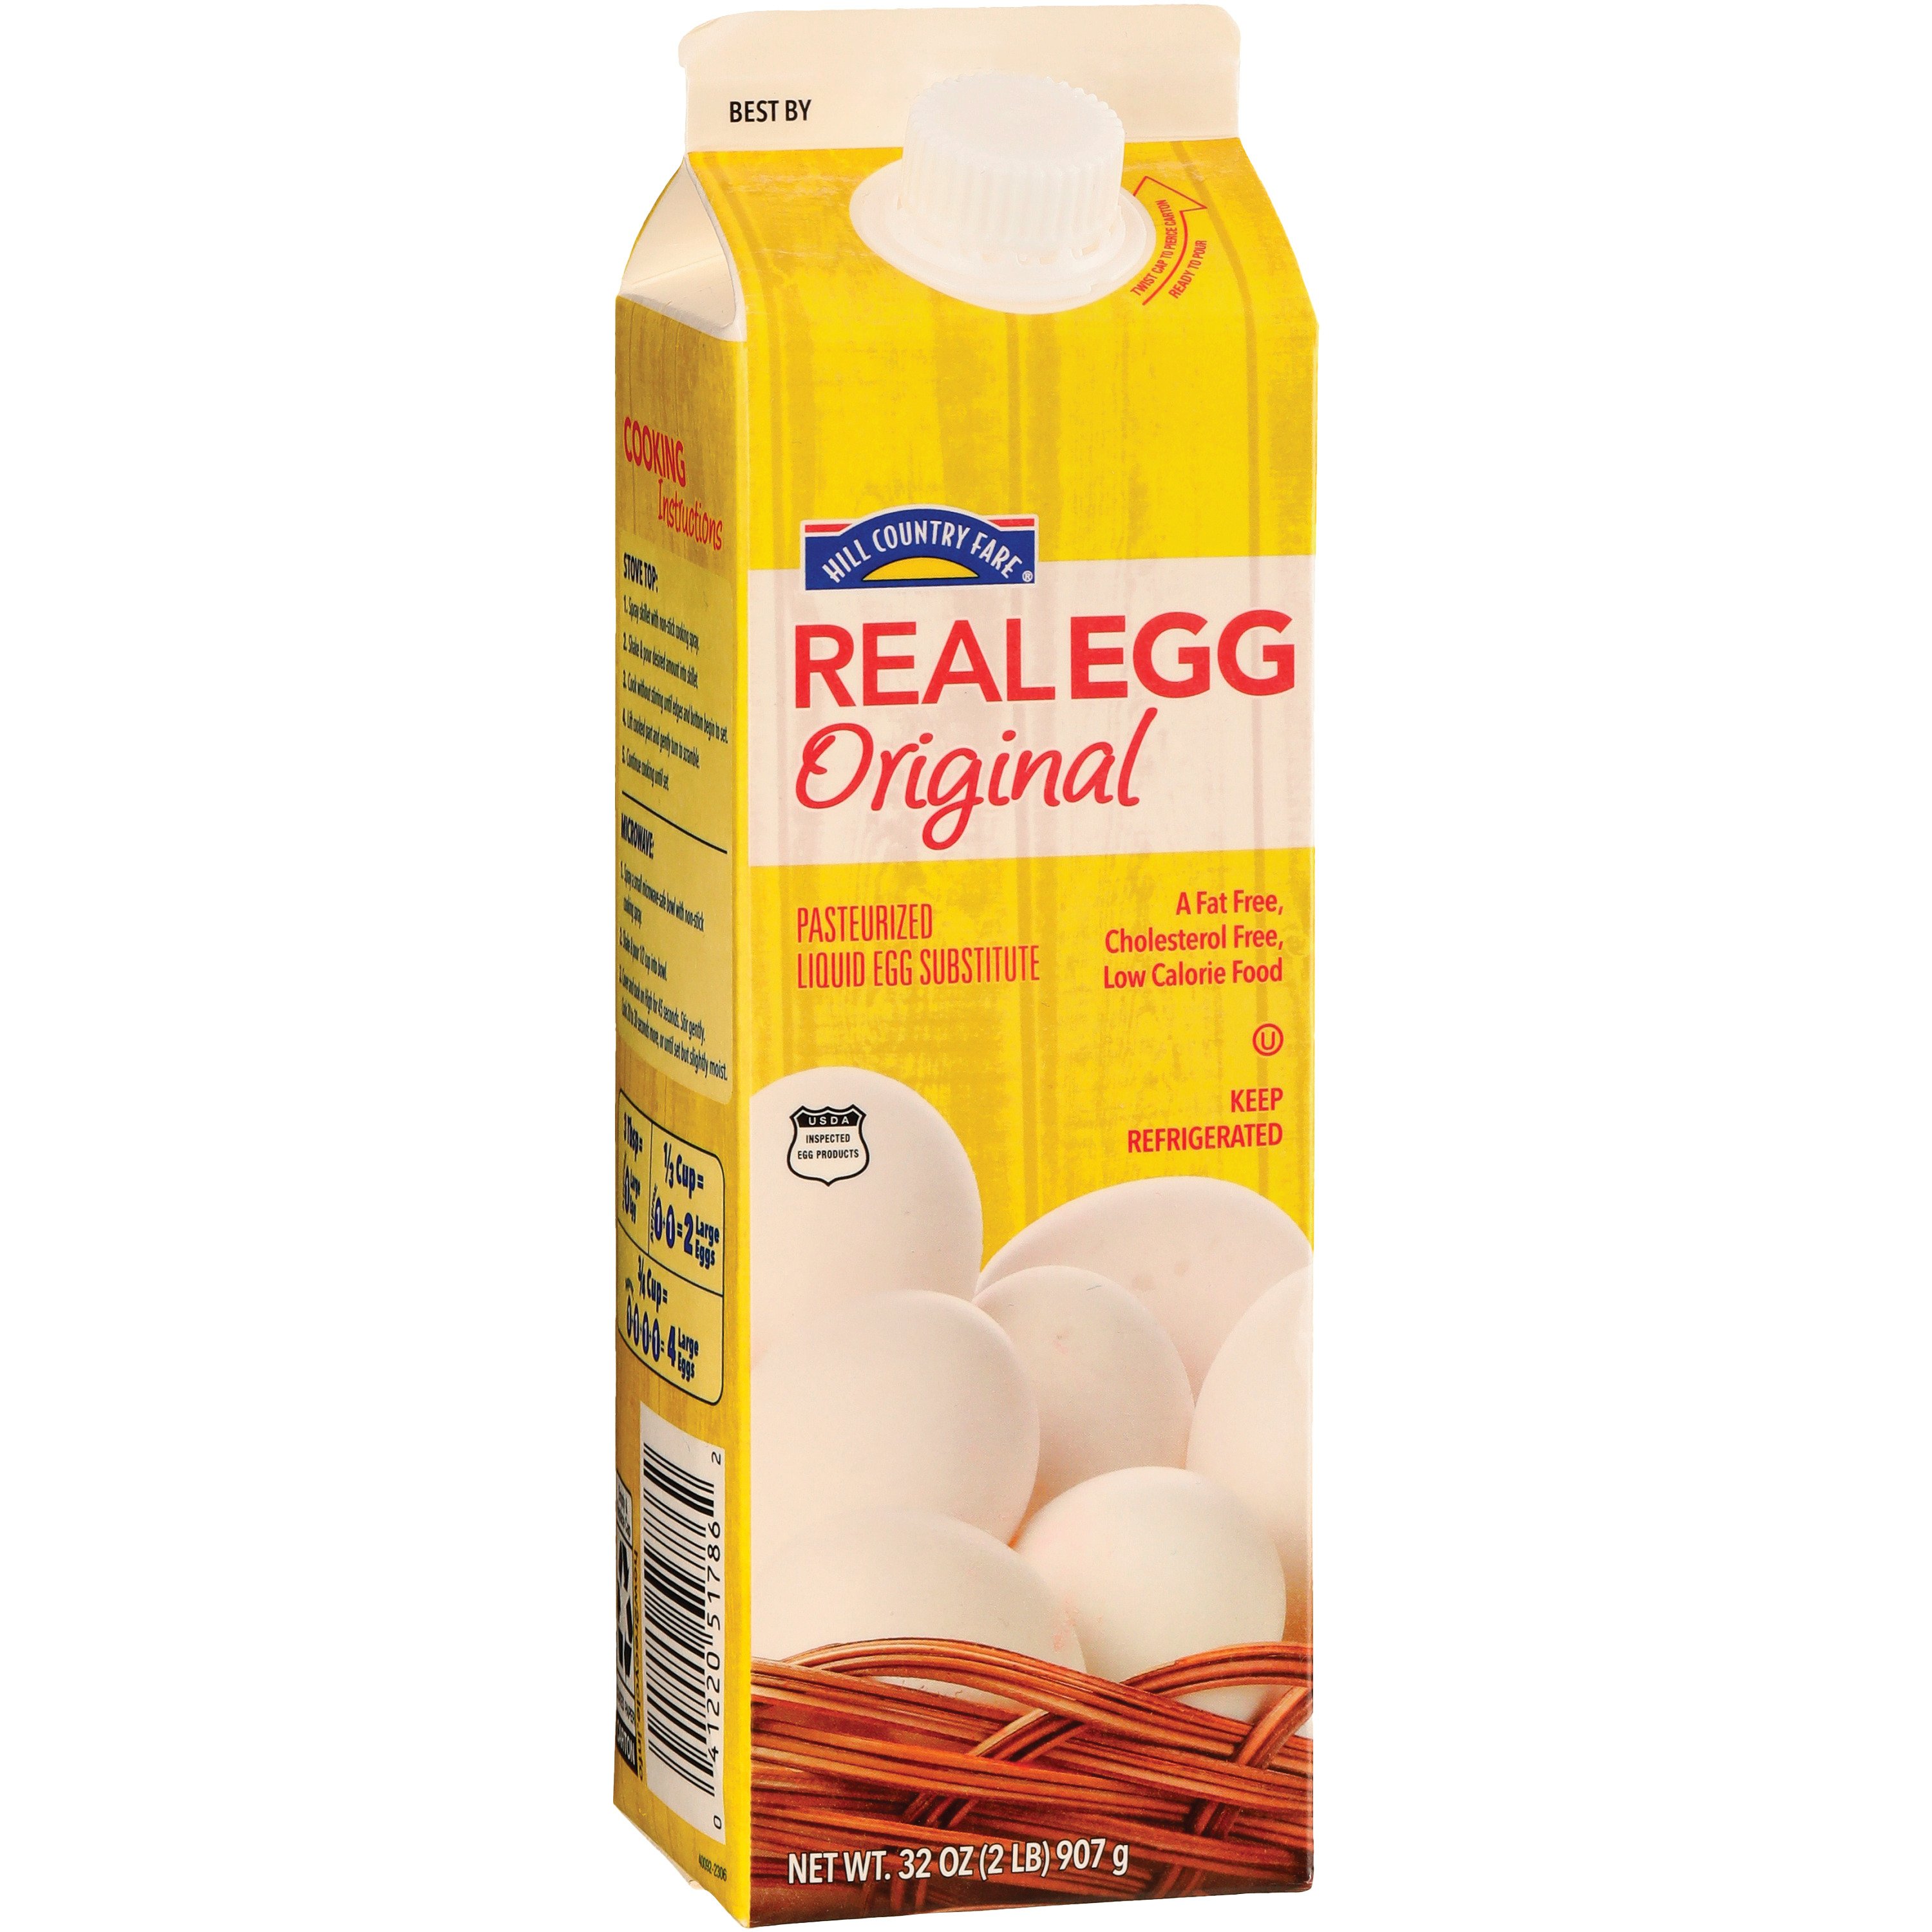 Egg Beaters Egg Product, with Yolk